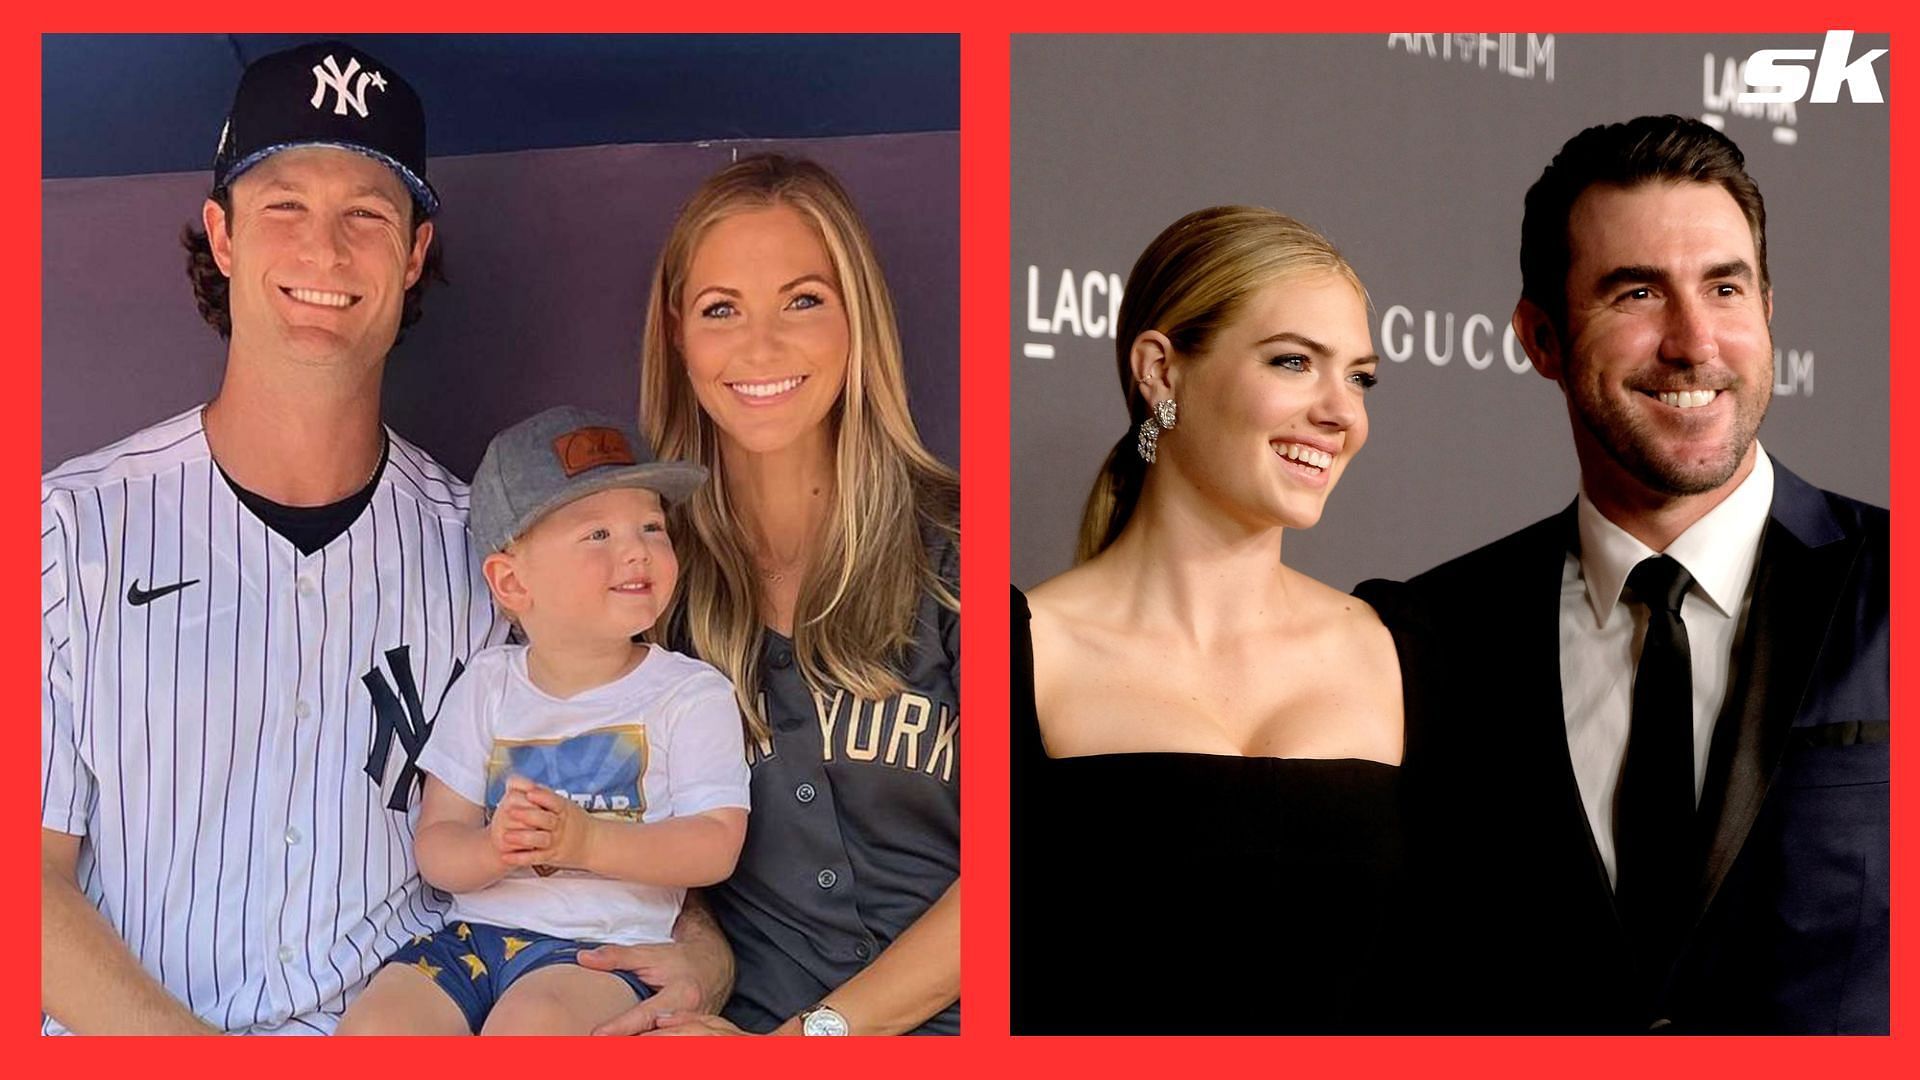 Gerrit Cole and Justin Verlander with their wives